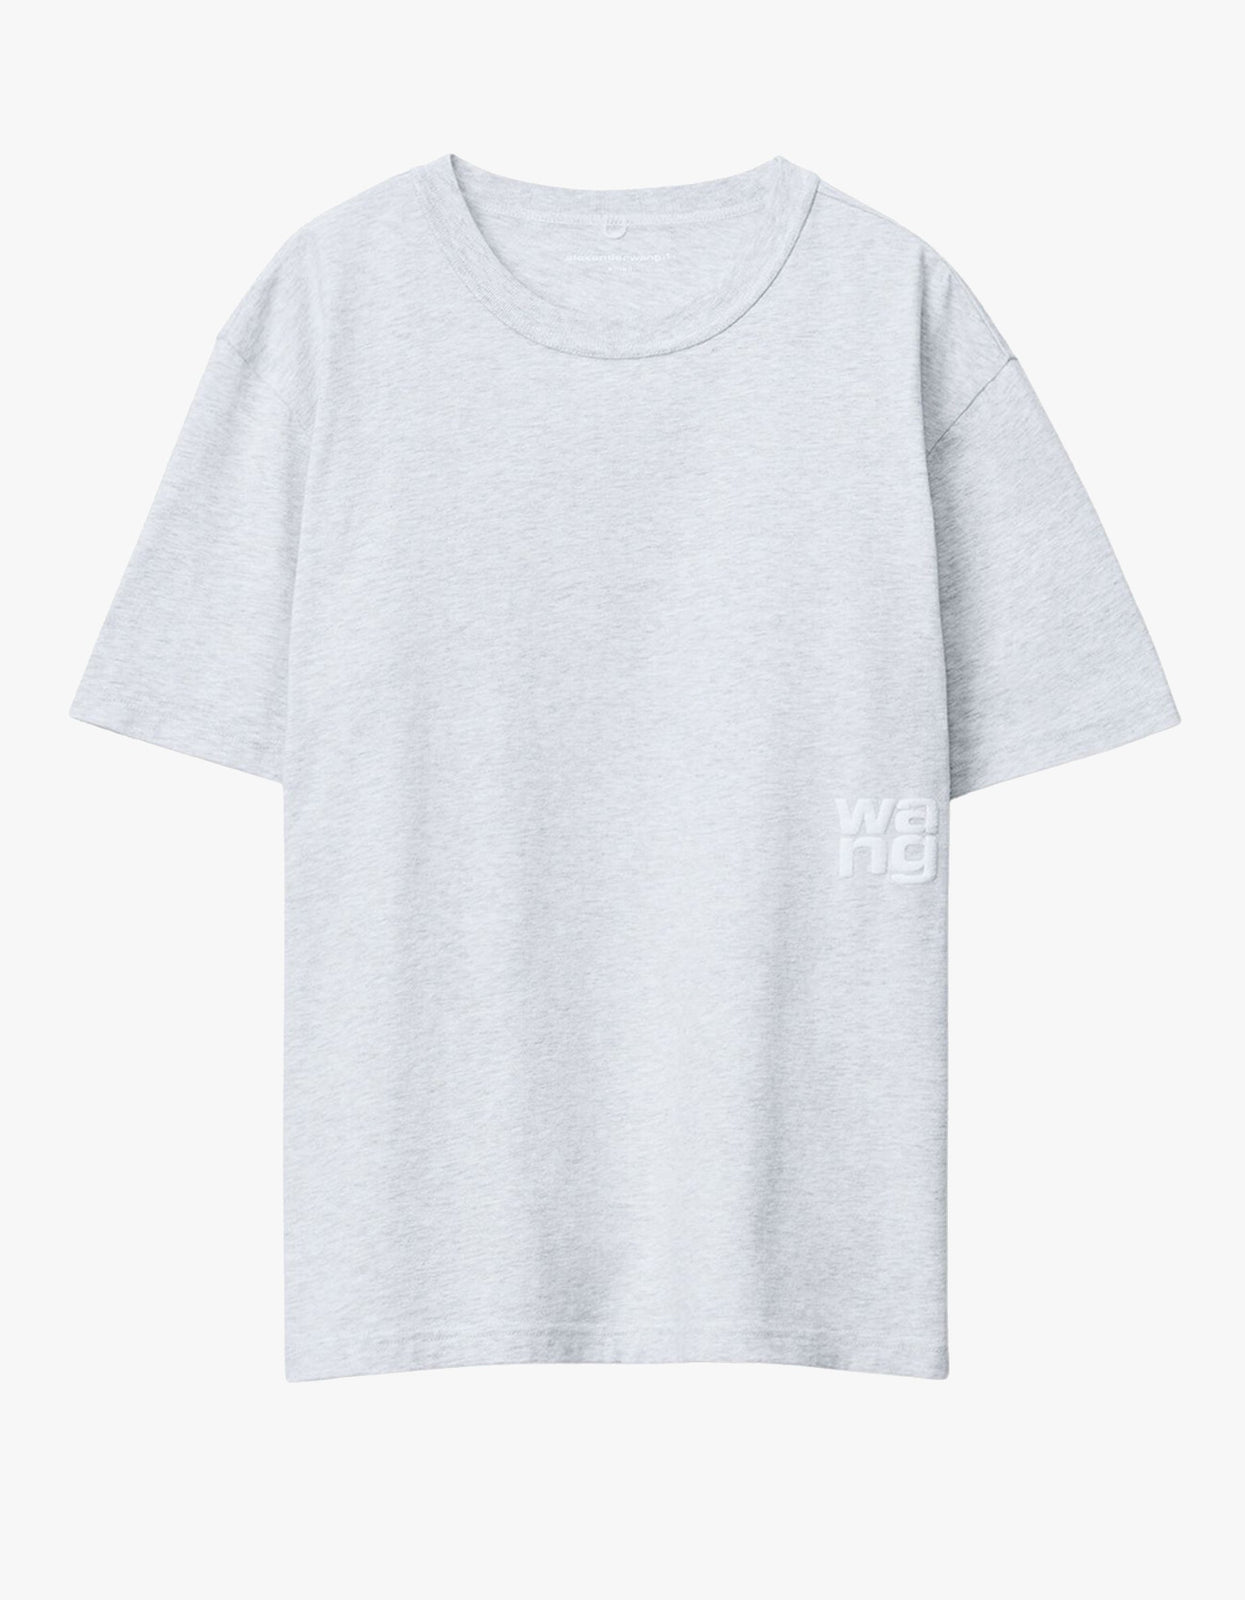 Shop Every Piece From the Alexander Wang X Uniqlo AIRism